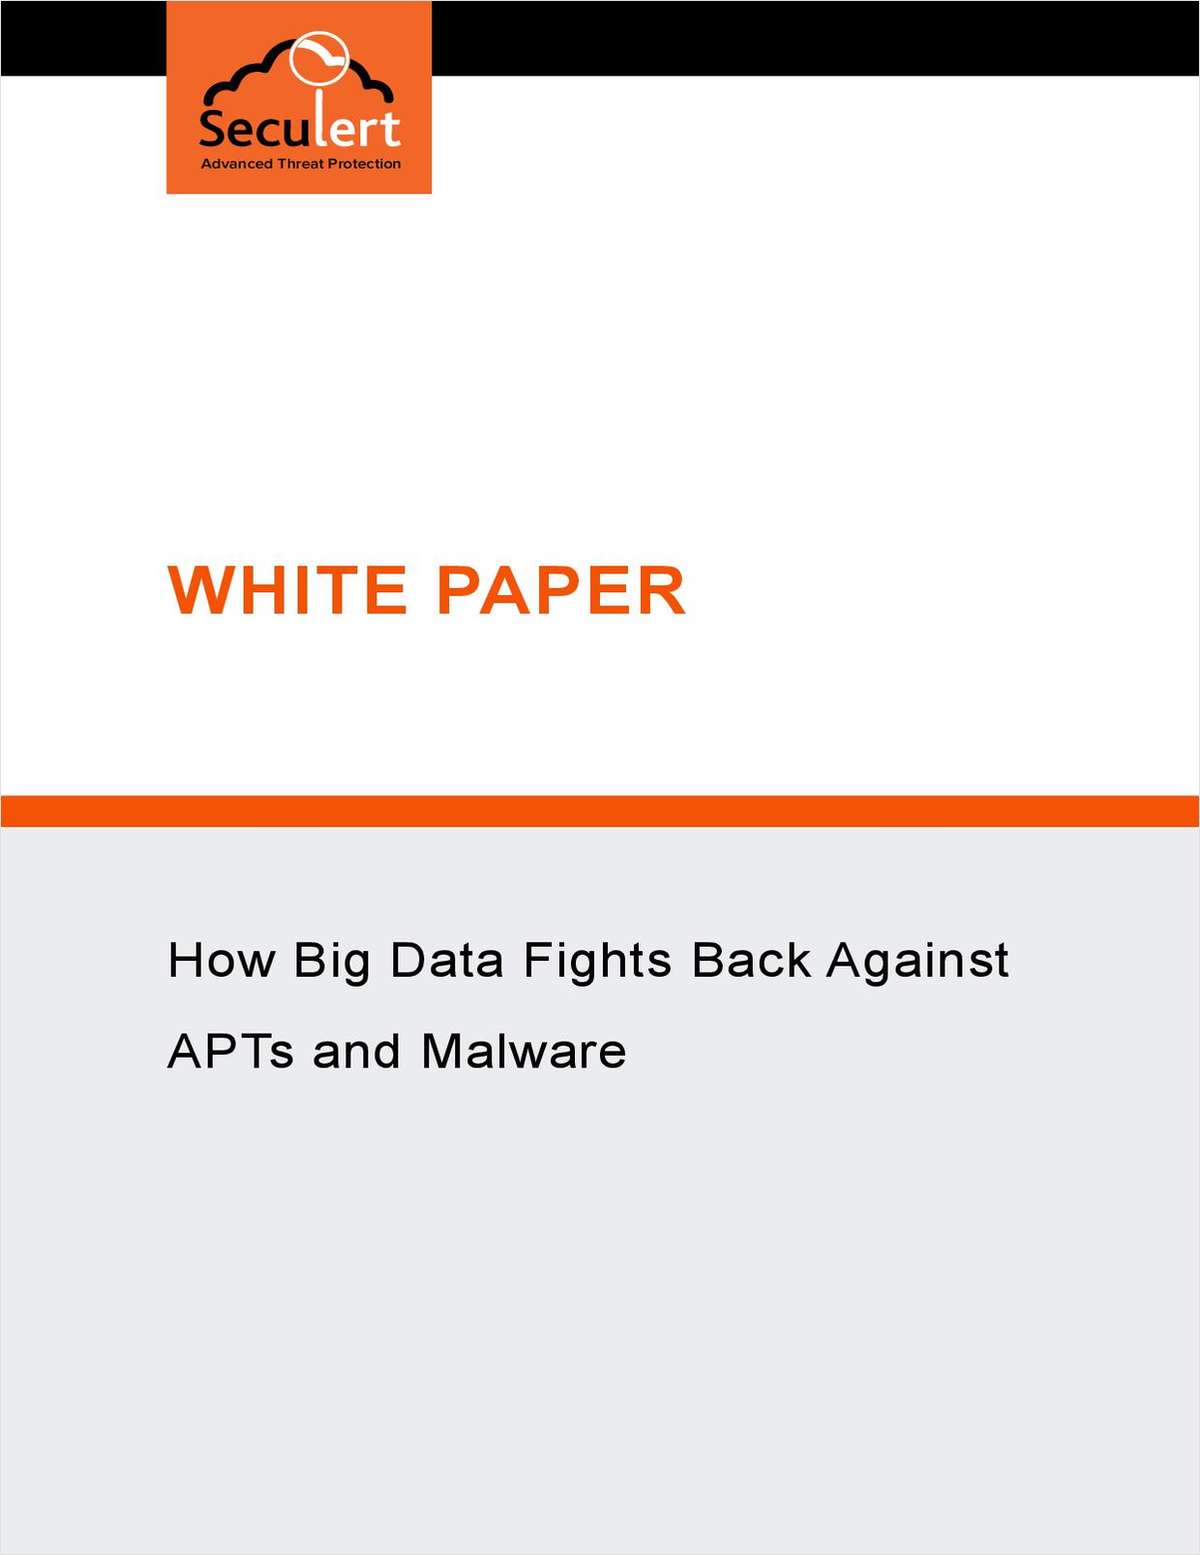 How Big Data Fights Back Against APTs and Malware